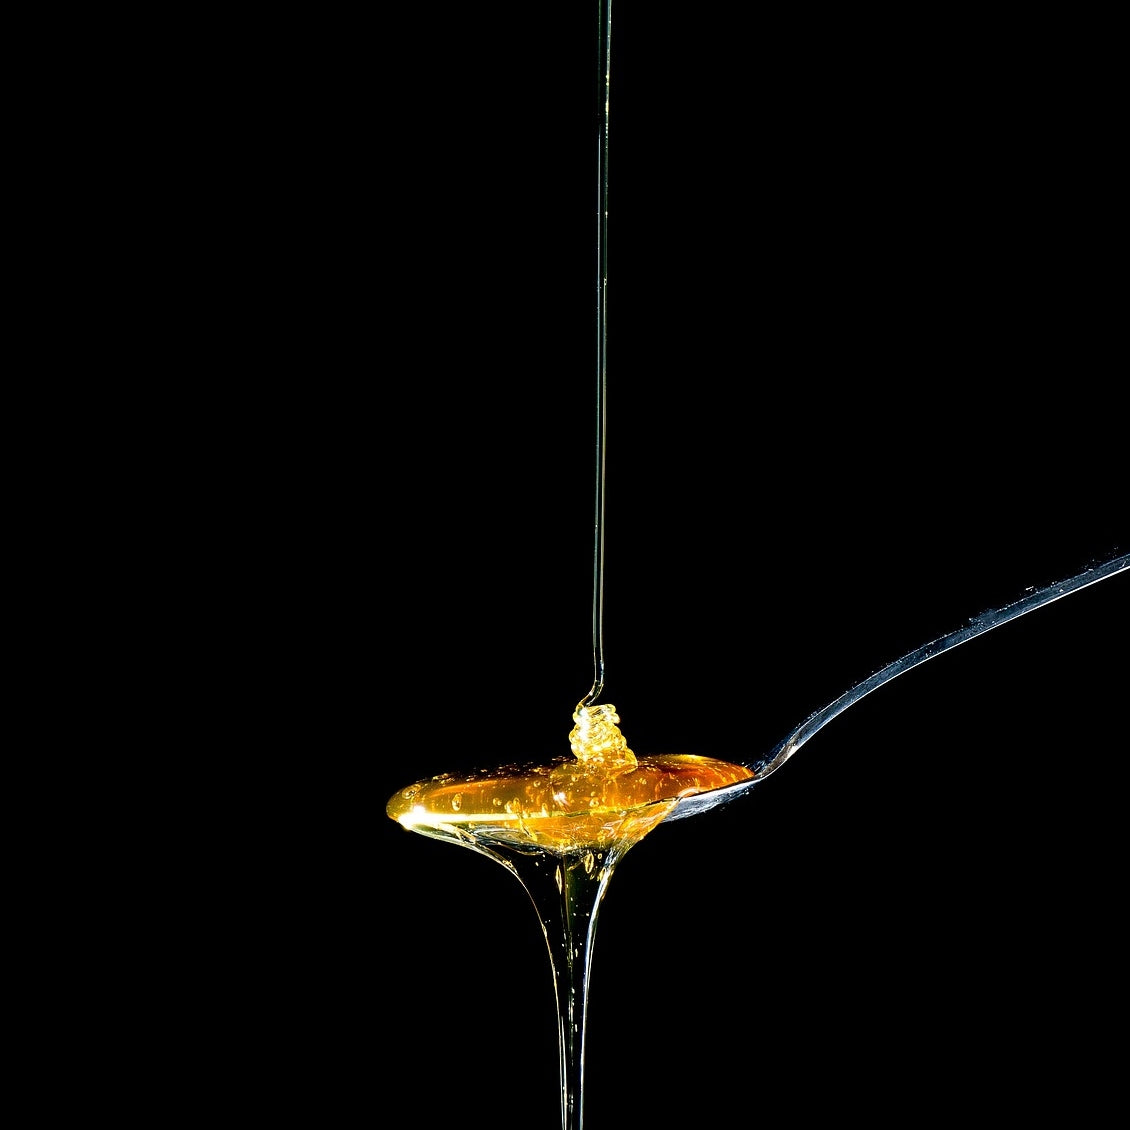 Honey being drizzled onto a spoon with a black background.